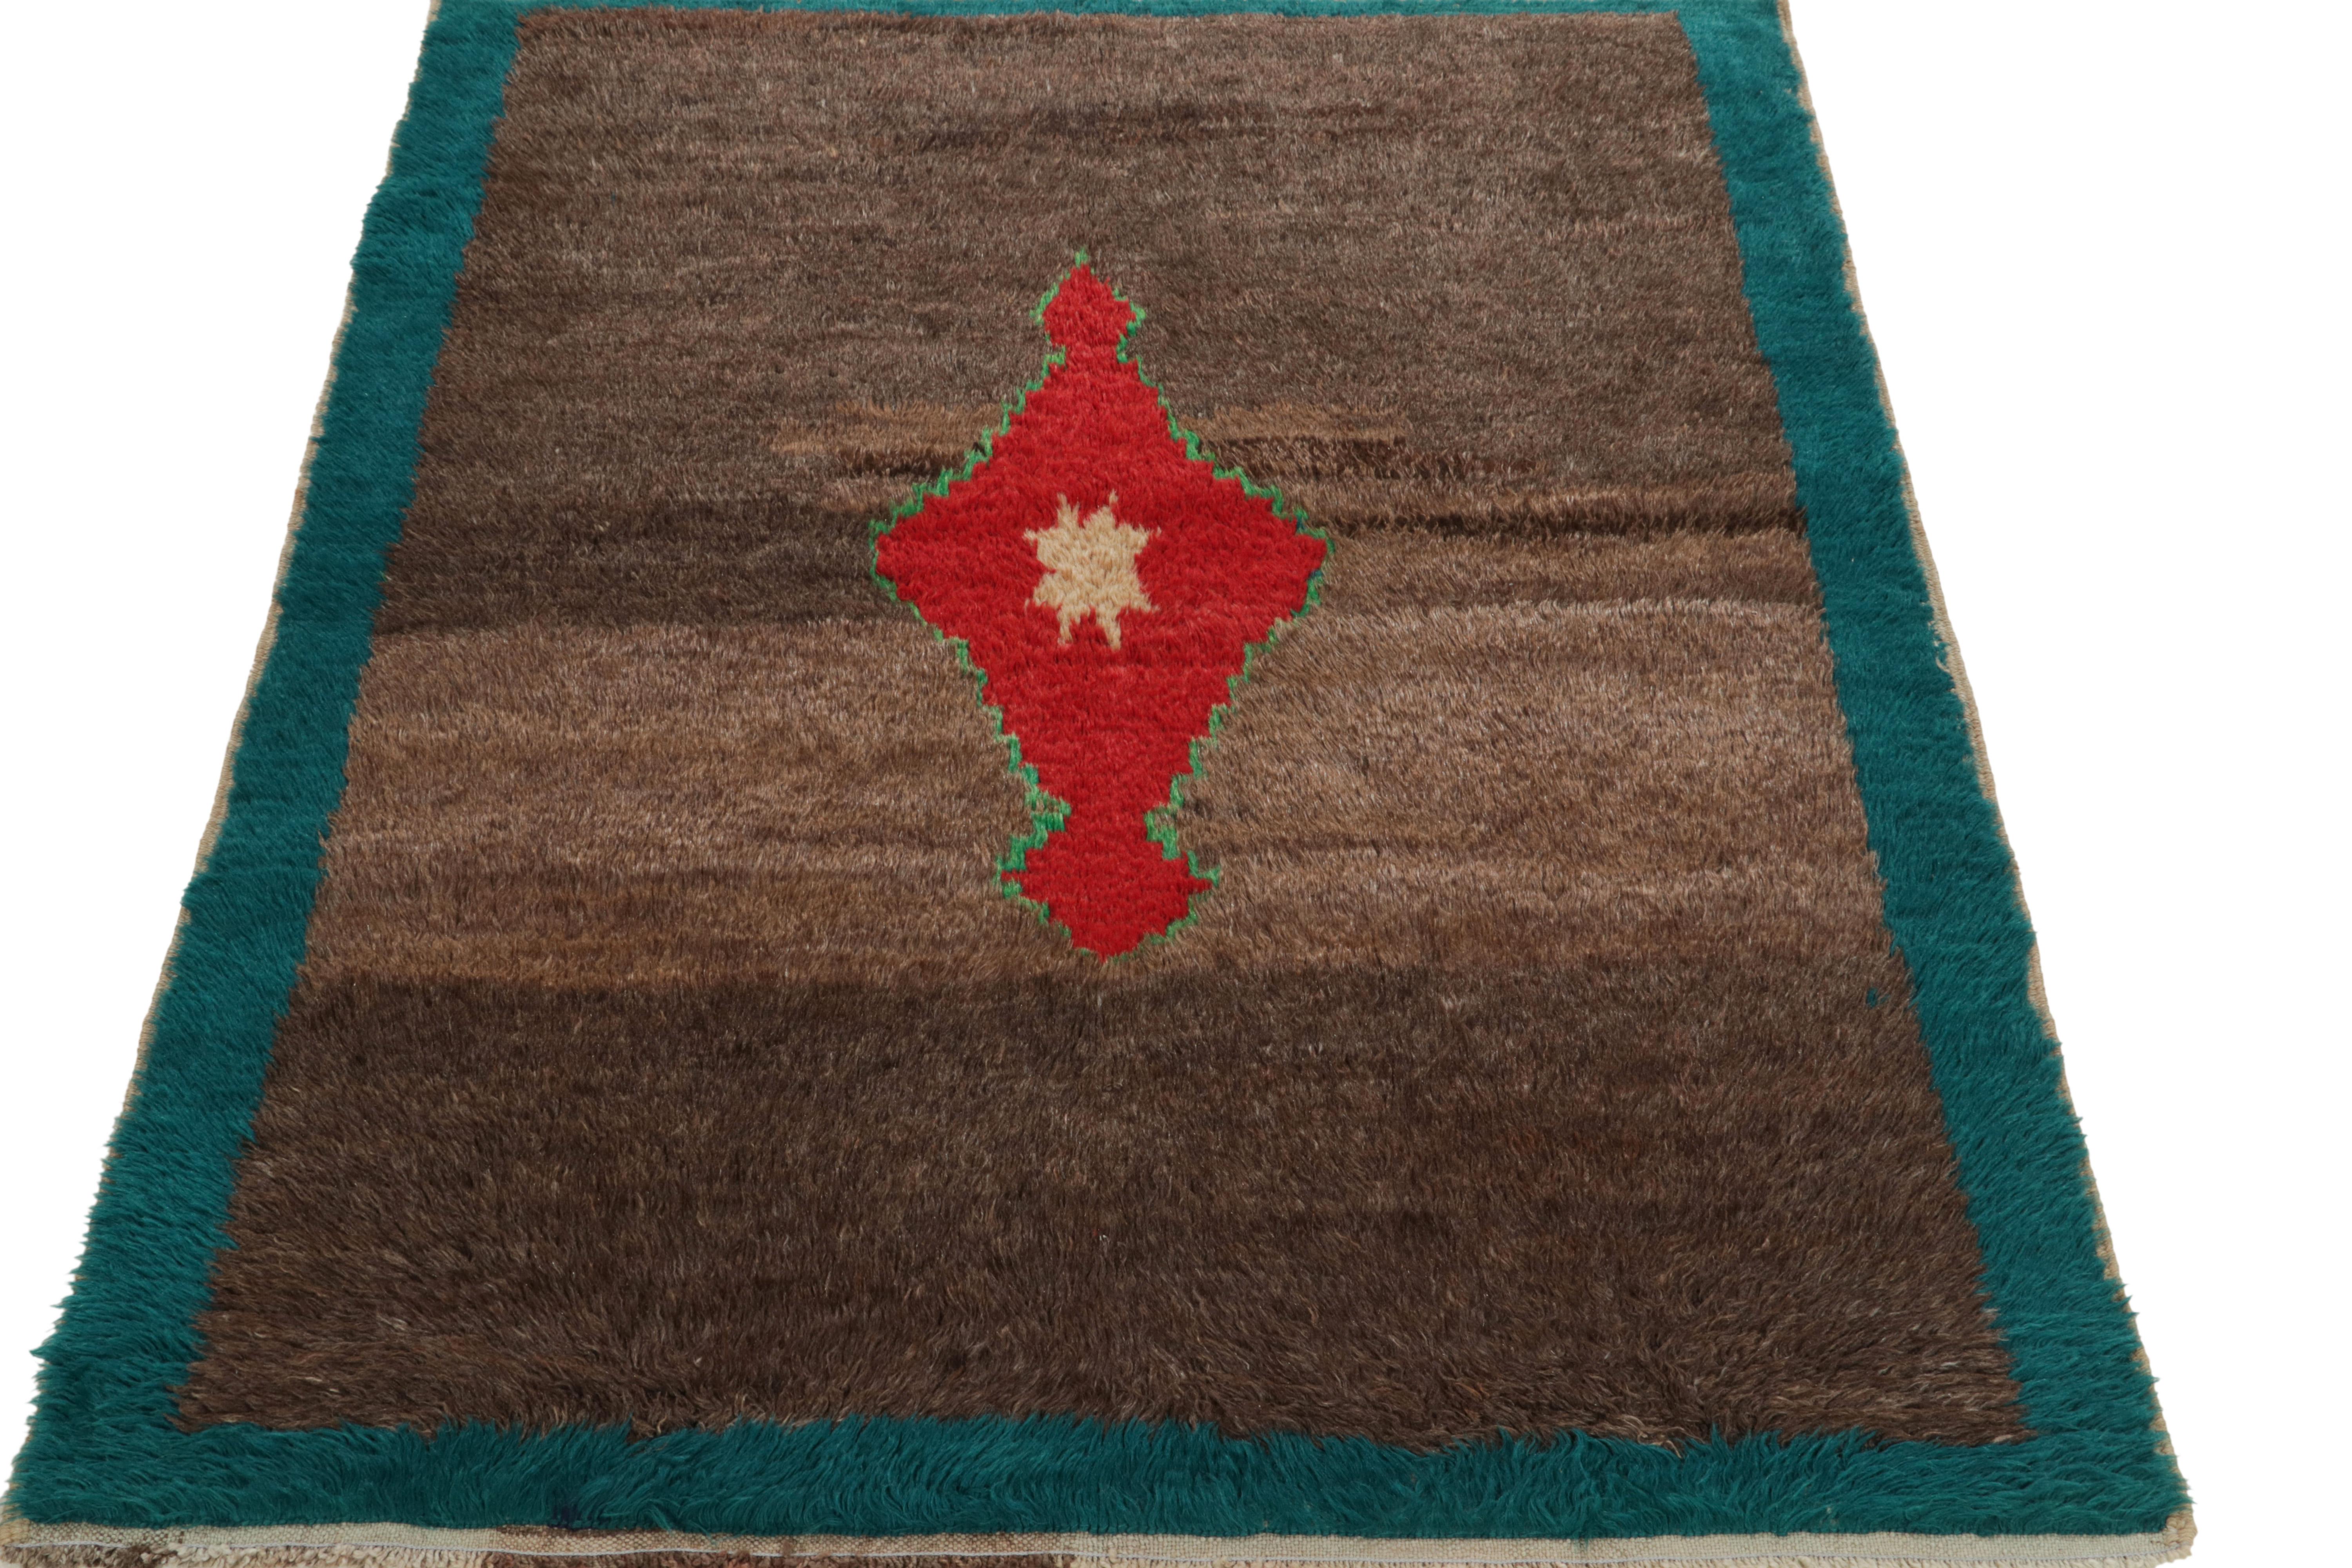 An impeccable display of Tulu sensibilities, a tastefully abrashed vintage rug featuring a striking red medallion with green & beige tints. Originating from Turkey circa 1950-1960, this 4x6 hand-knotted wool piece revels in a mature abrashed brown